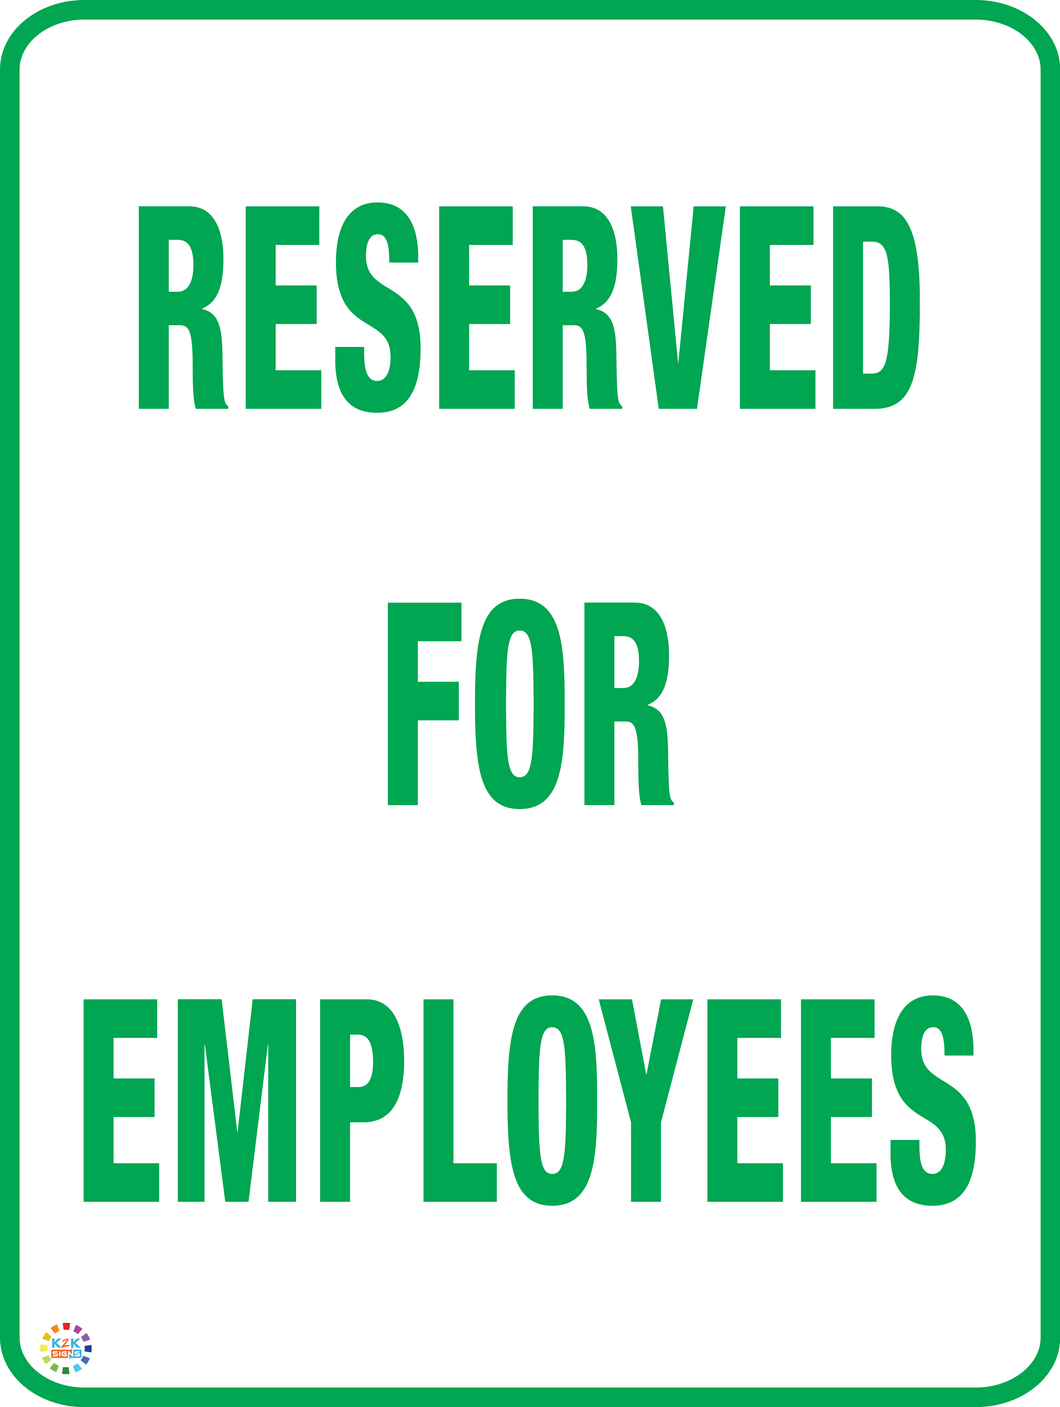 Reserved For Employees Sign